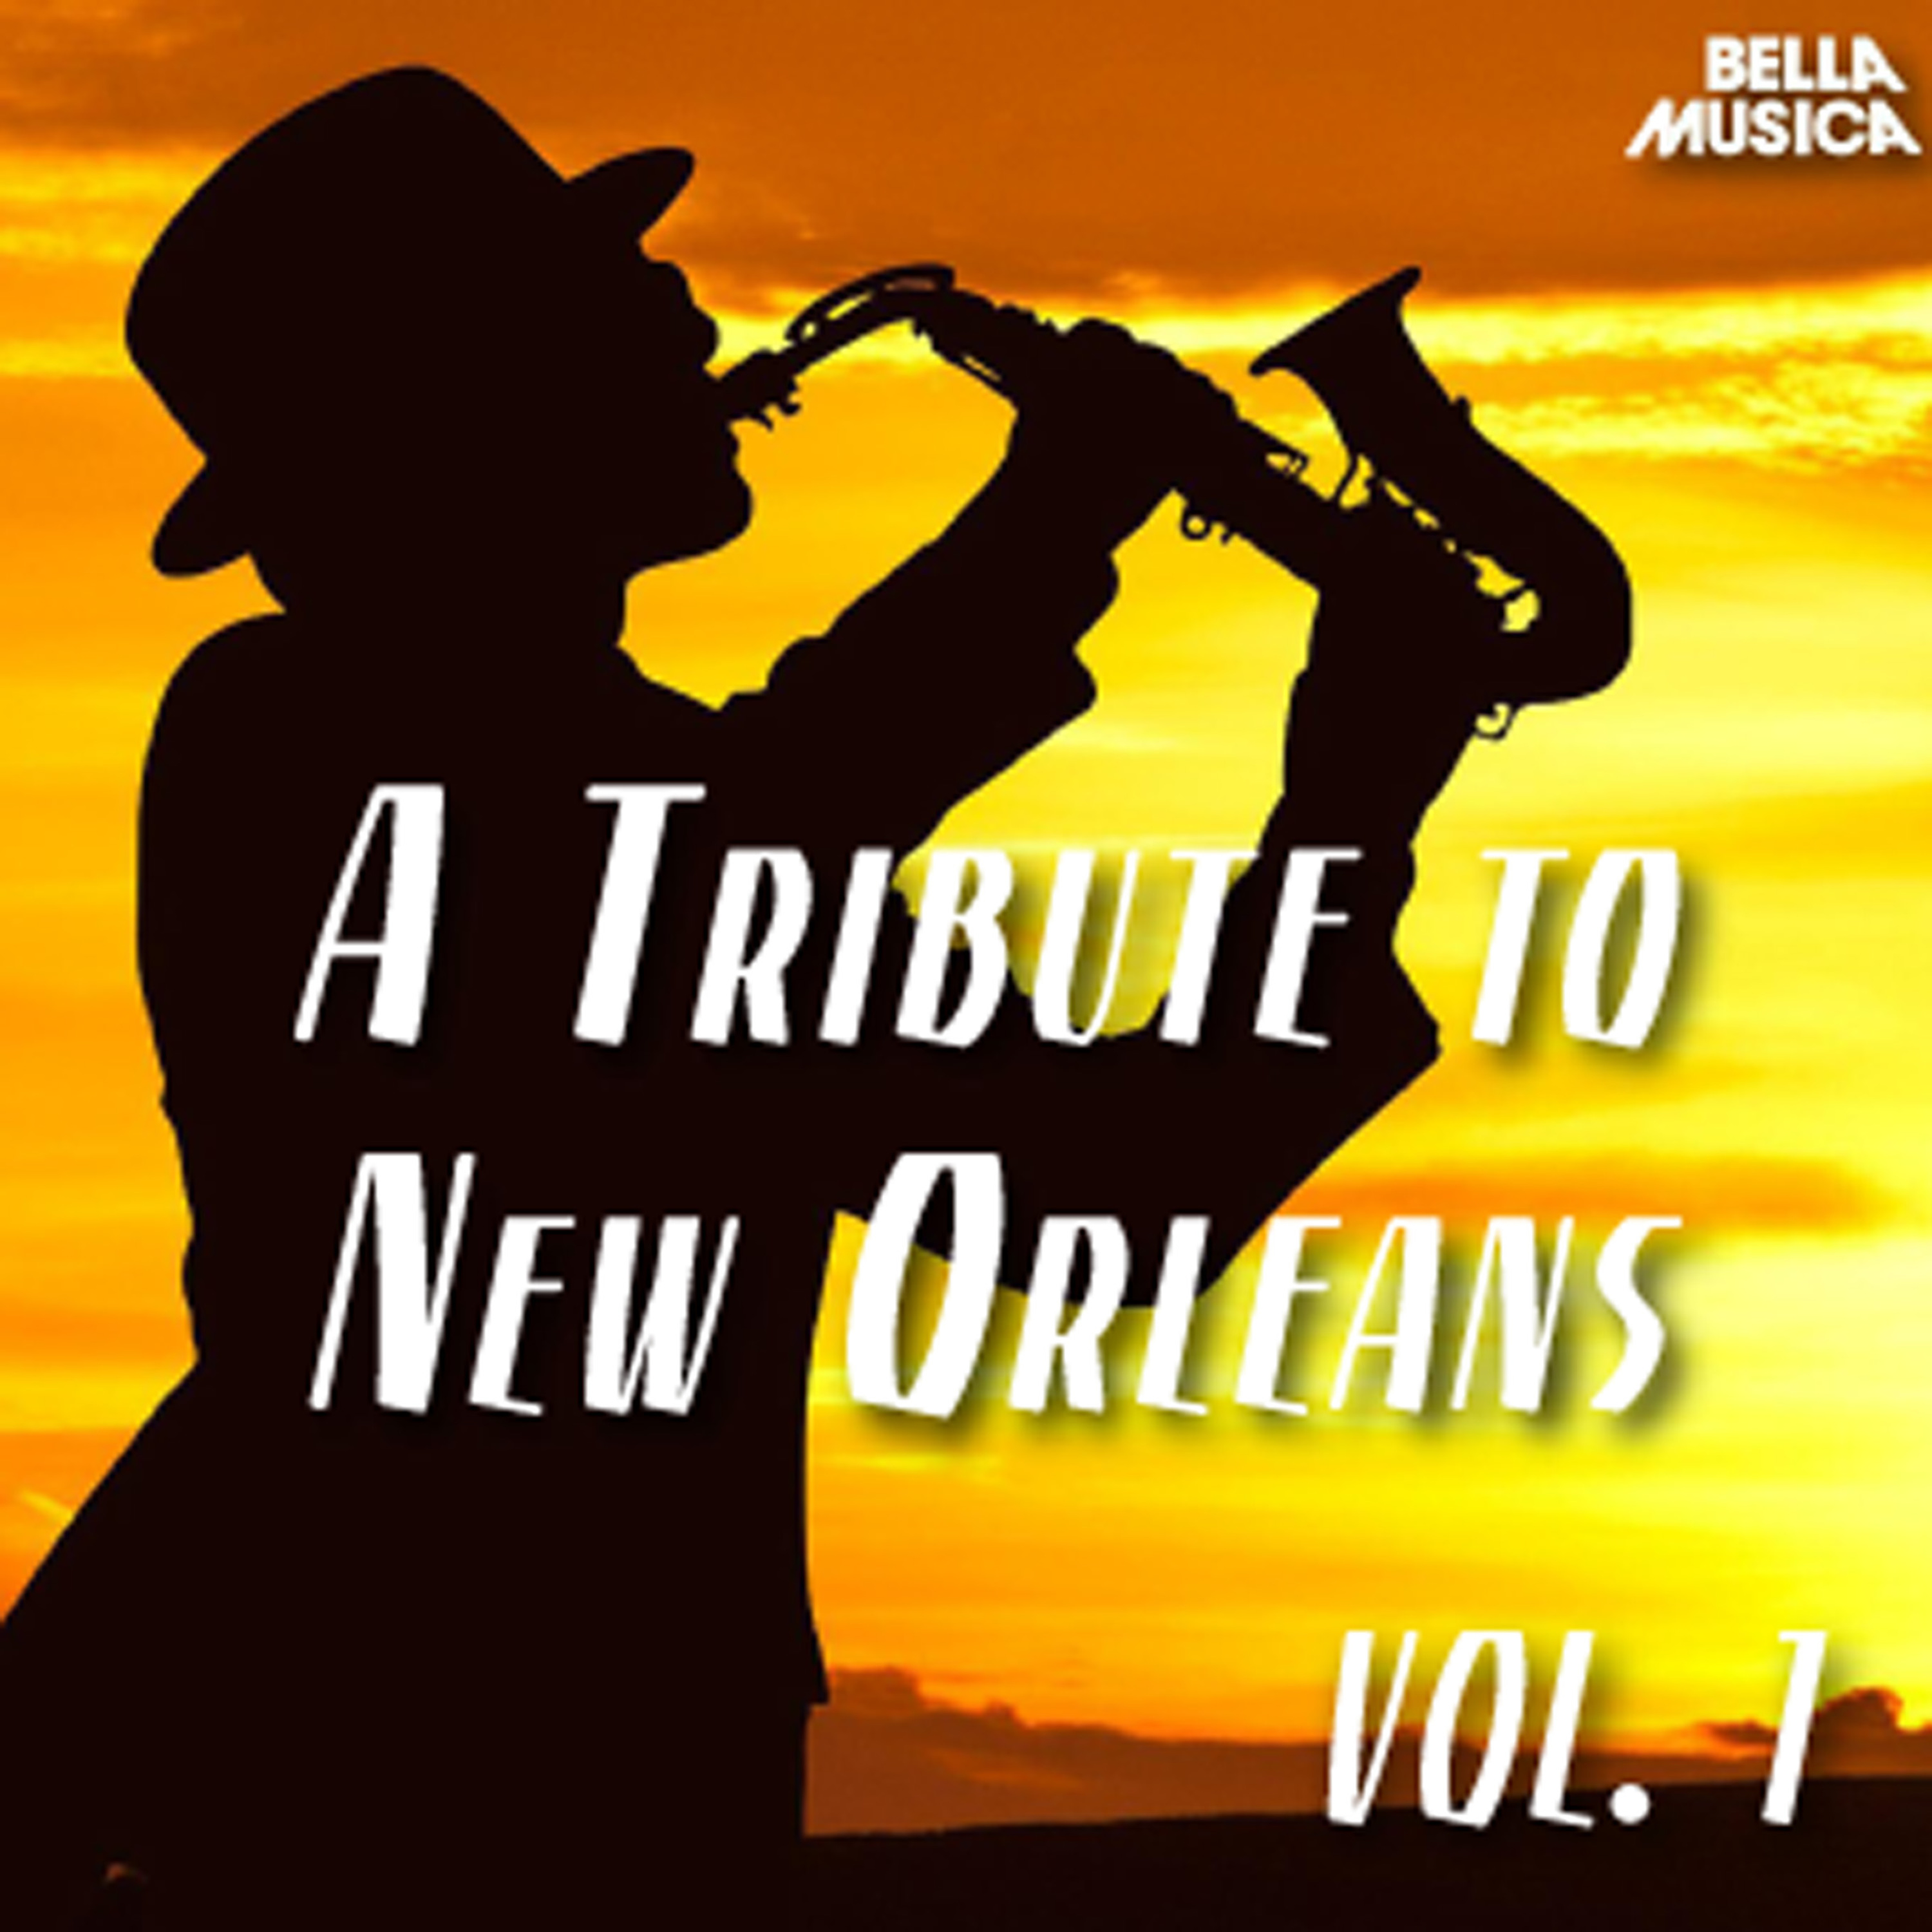 A Tribute to New Orleans, Vol. 1